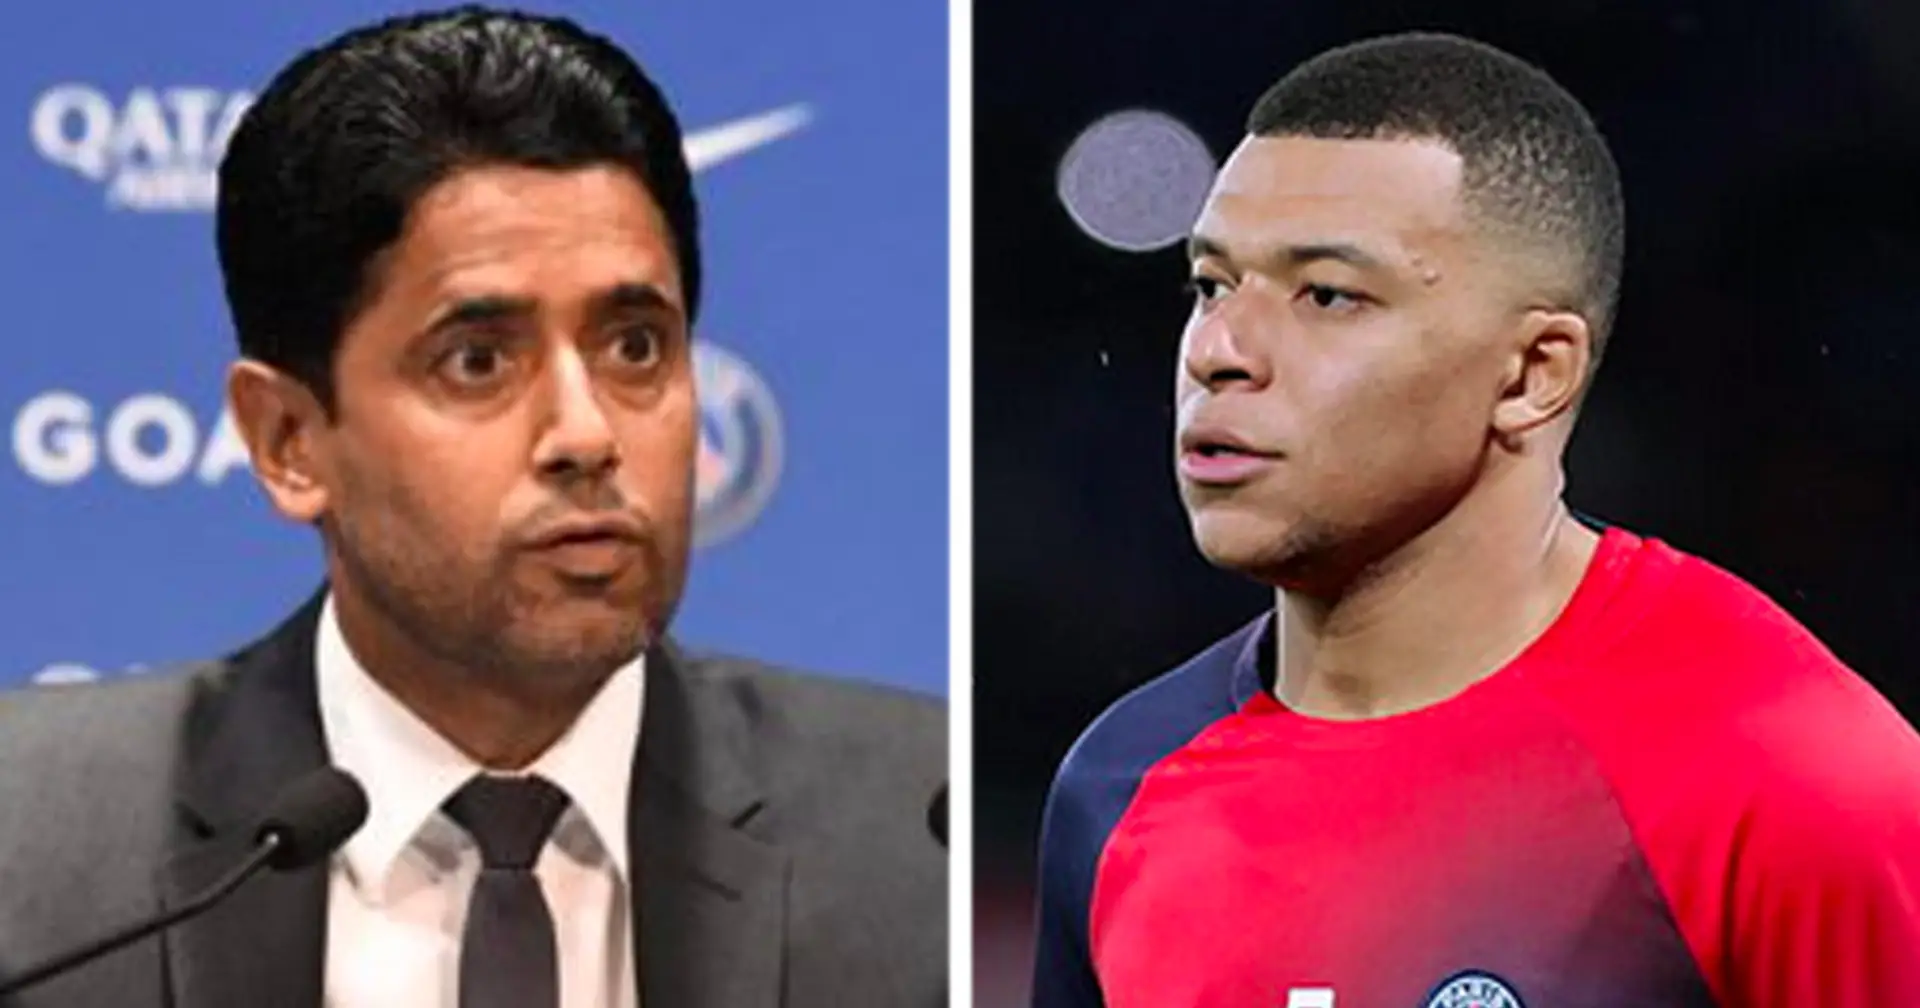 'I want Mbappe to stay. It's the best club for him': PSG president Al Khelaifi